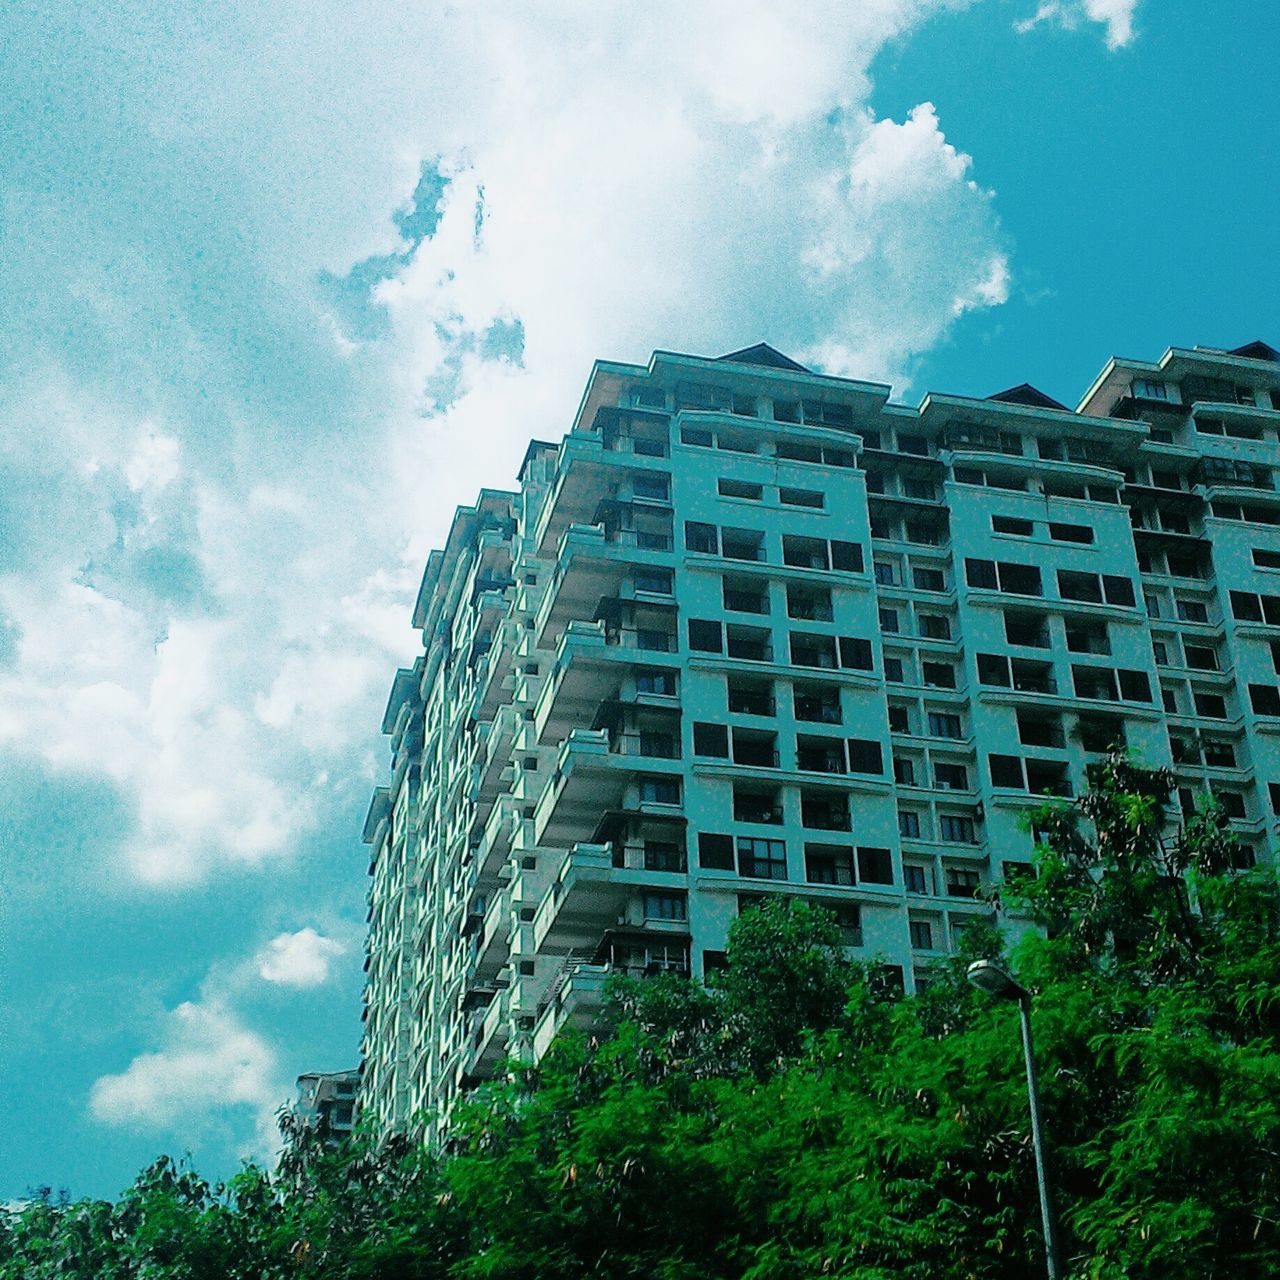 building exterior, architecture, built structure, low angle view, sky, tree, cloud - sky, growth, building, blue, city, residential building, day, cloud, outdoors, residential structure, no people, window, cloudy, house